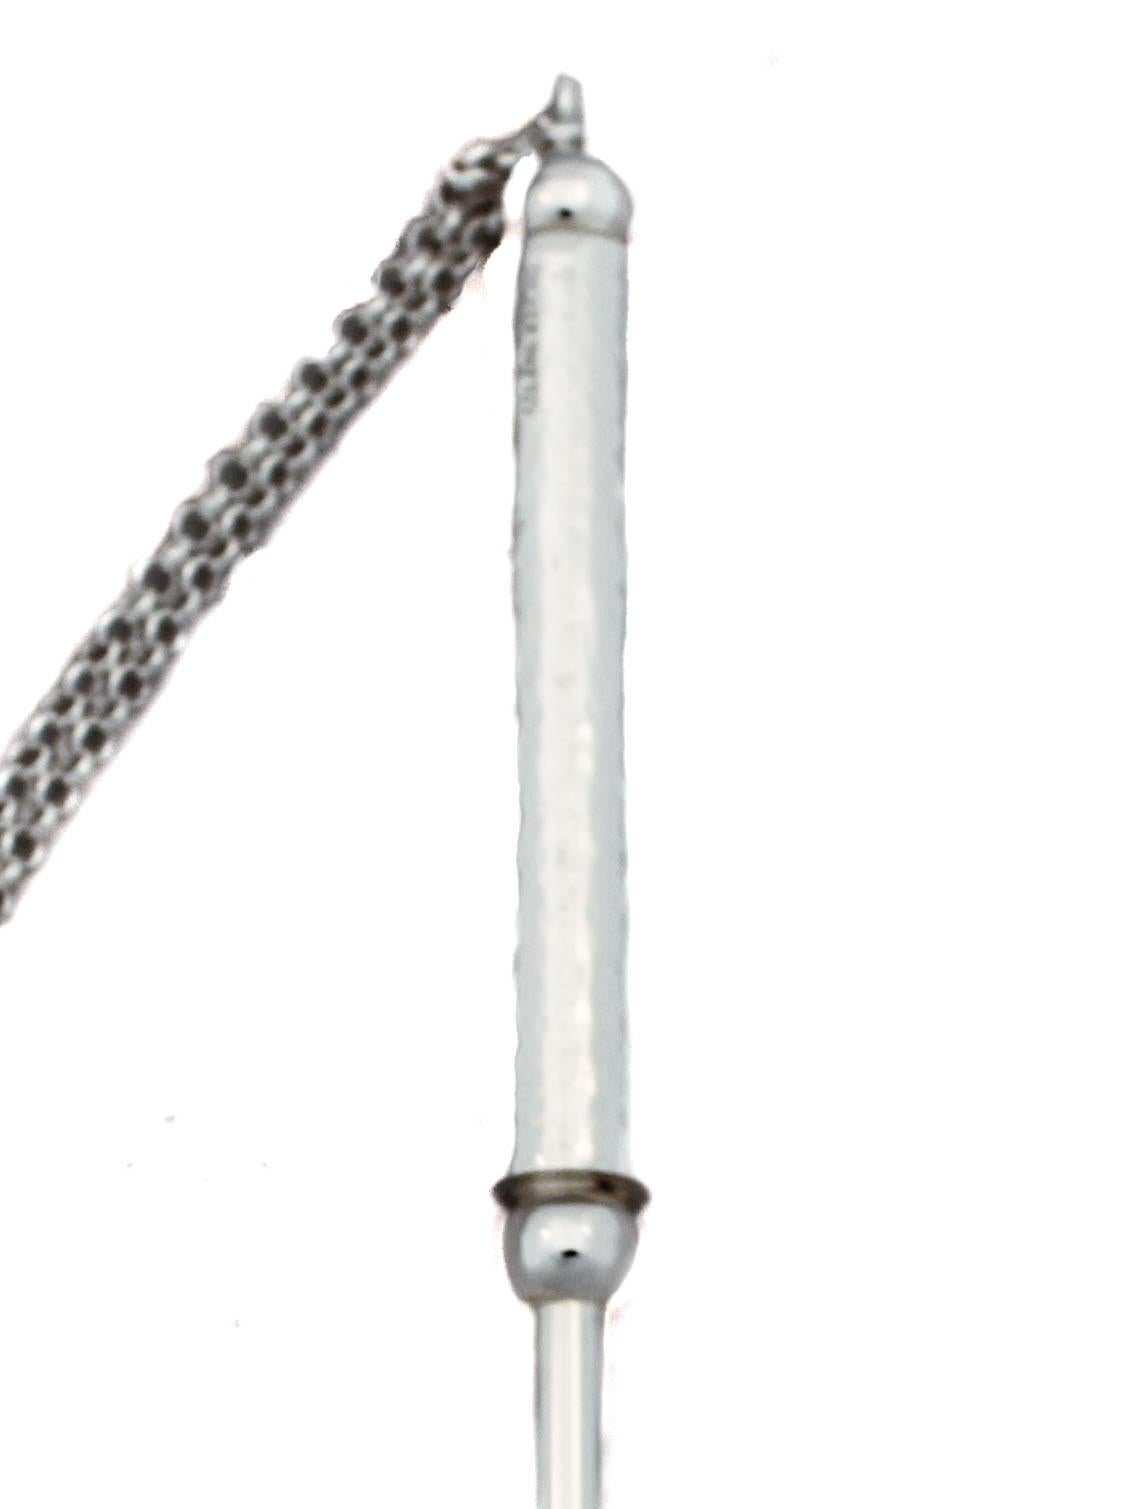 This sterling silver Torah pointer (Yad) from Israel has a hammered finish on the handle and a sterling silver chain on the end to hang on the Torah.  The tip has an index finger pointing, making it easier for the reader to follow along.  A